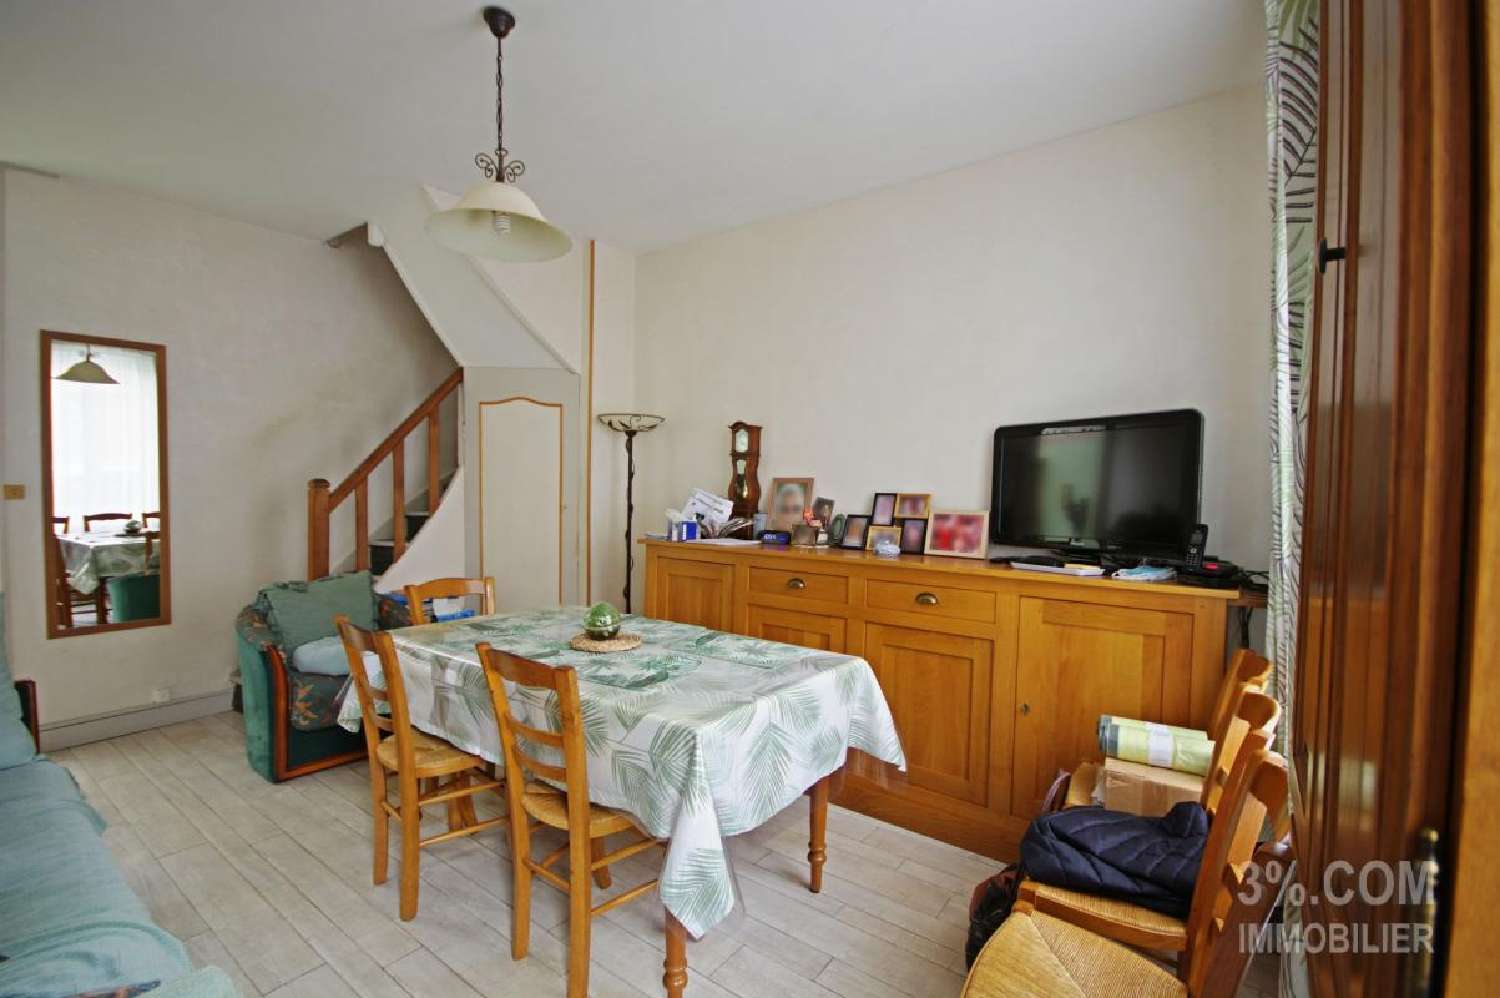  for sale house Amiens Somme 2